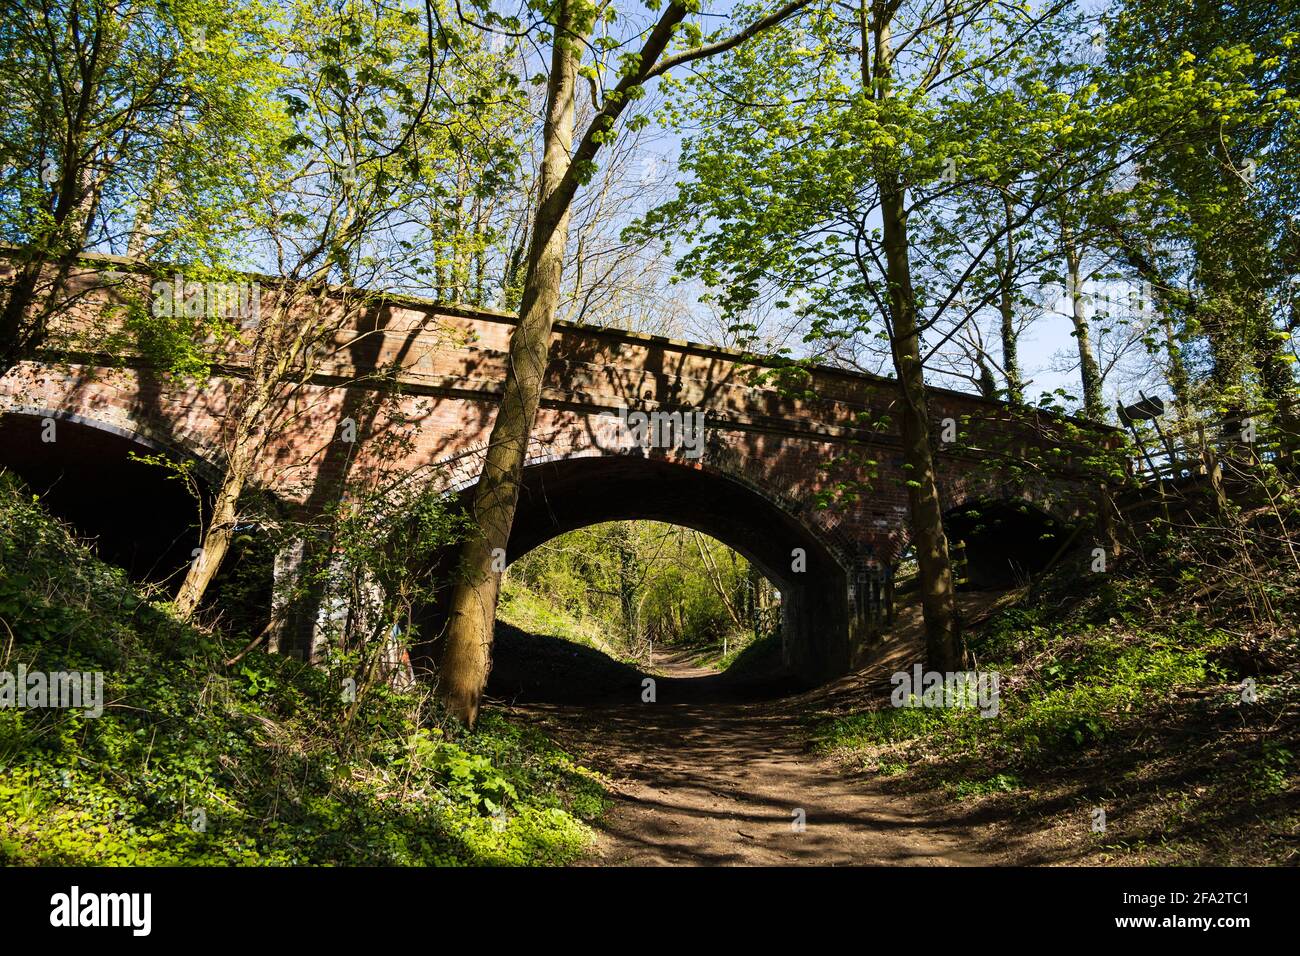 Bridge No 8 on the National Cycle network, Route 15 on the old Denton Woolsthorpe Branch line of the Great Northern Railway. Stock Photo